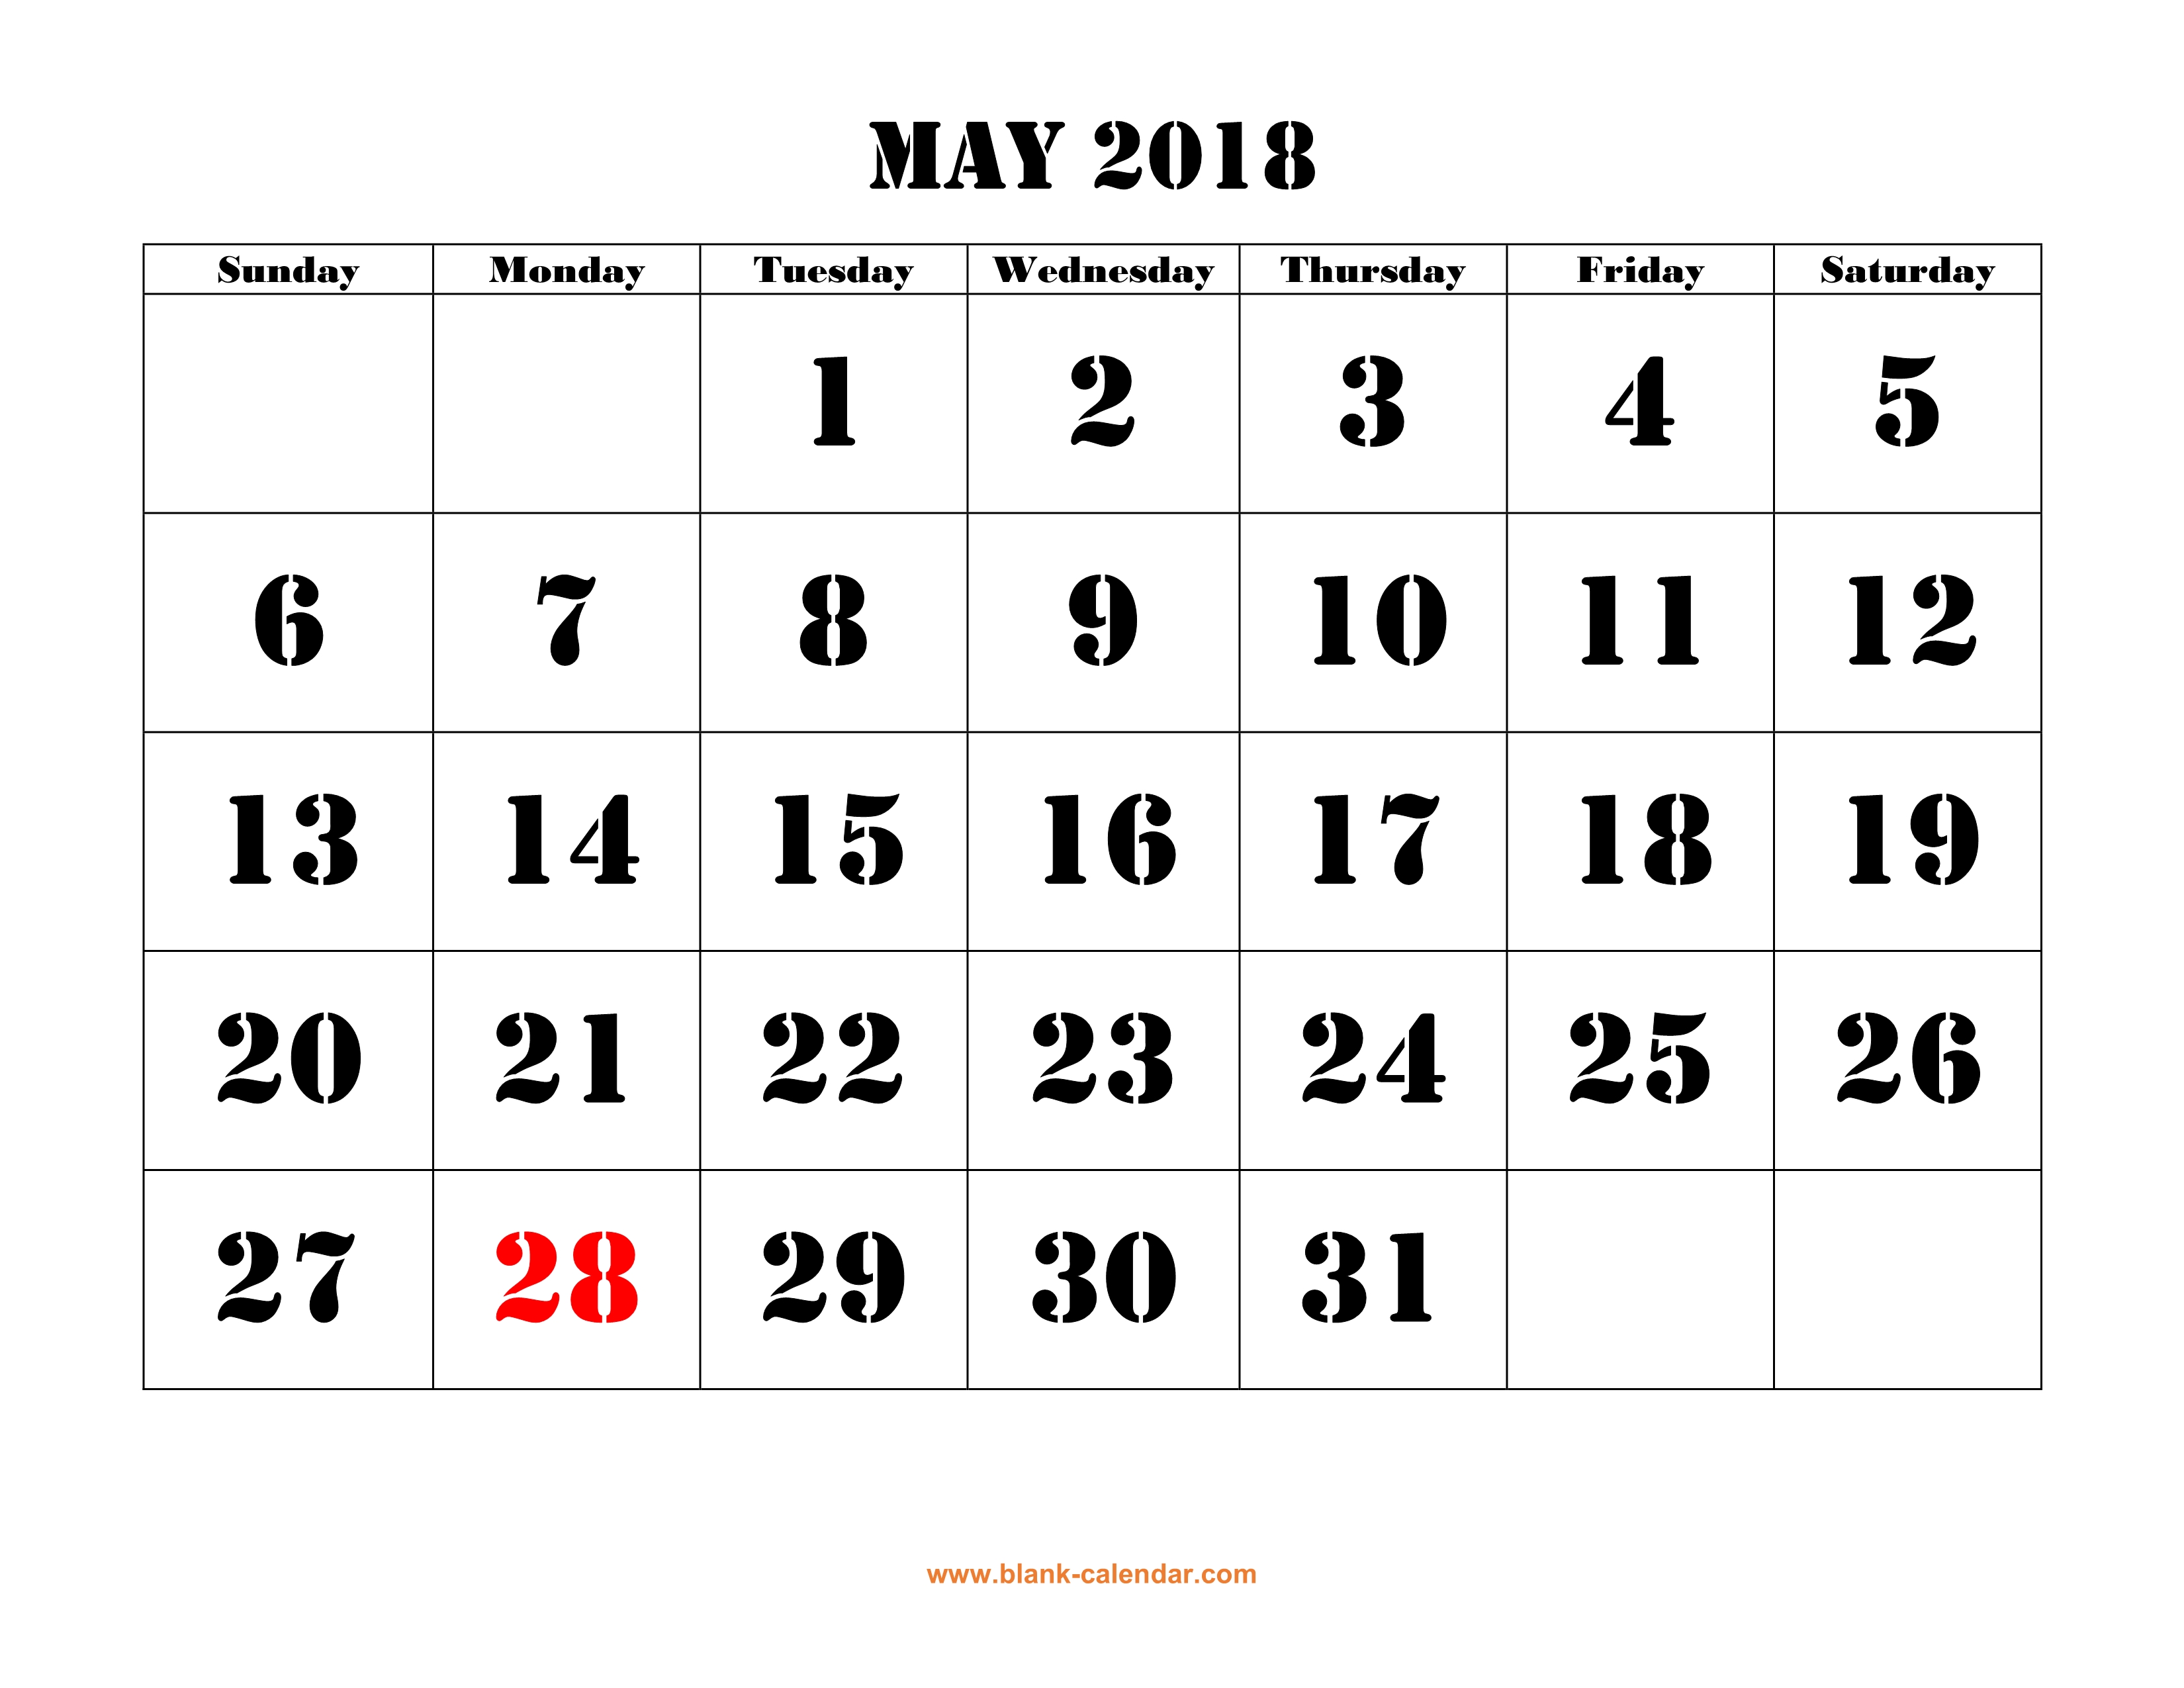 free-download-printable-may-2018-calendar-large-font-design-holidays-on-red